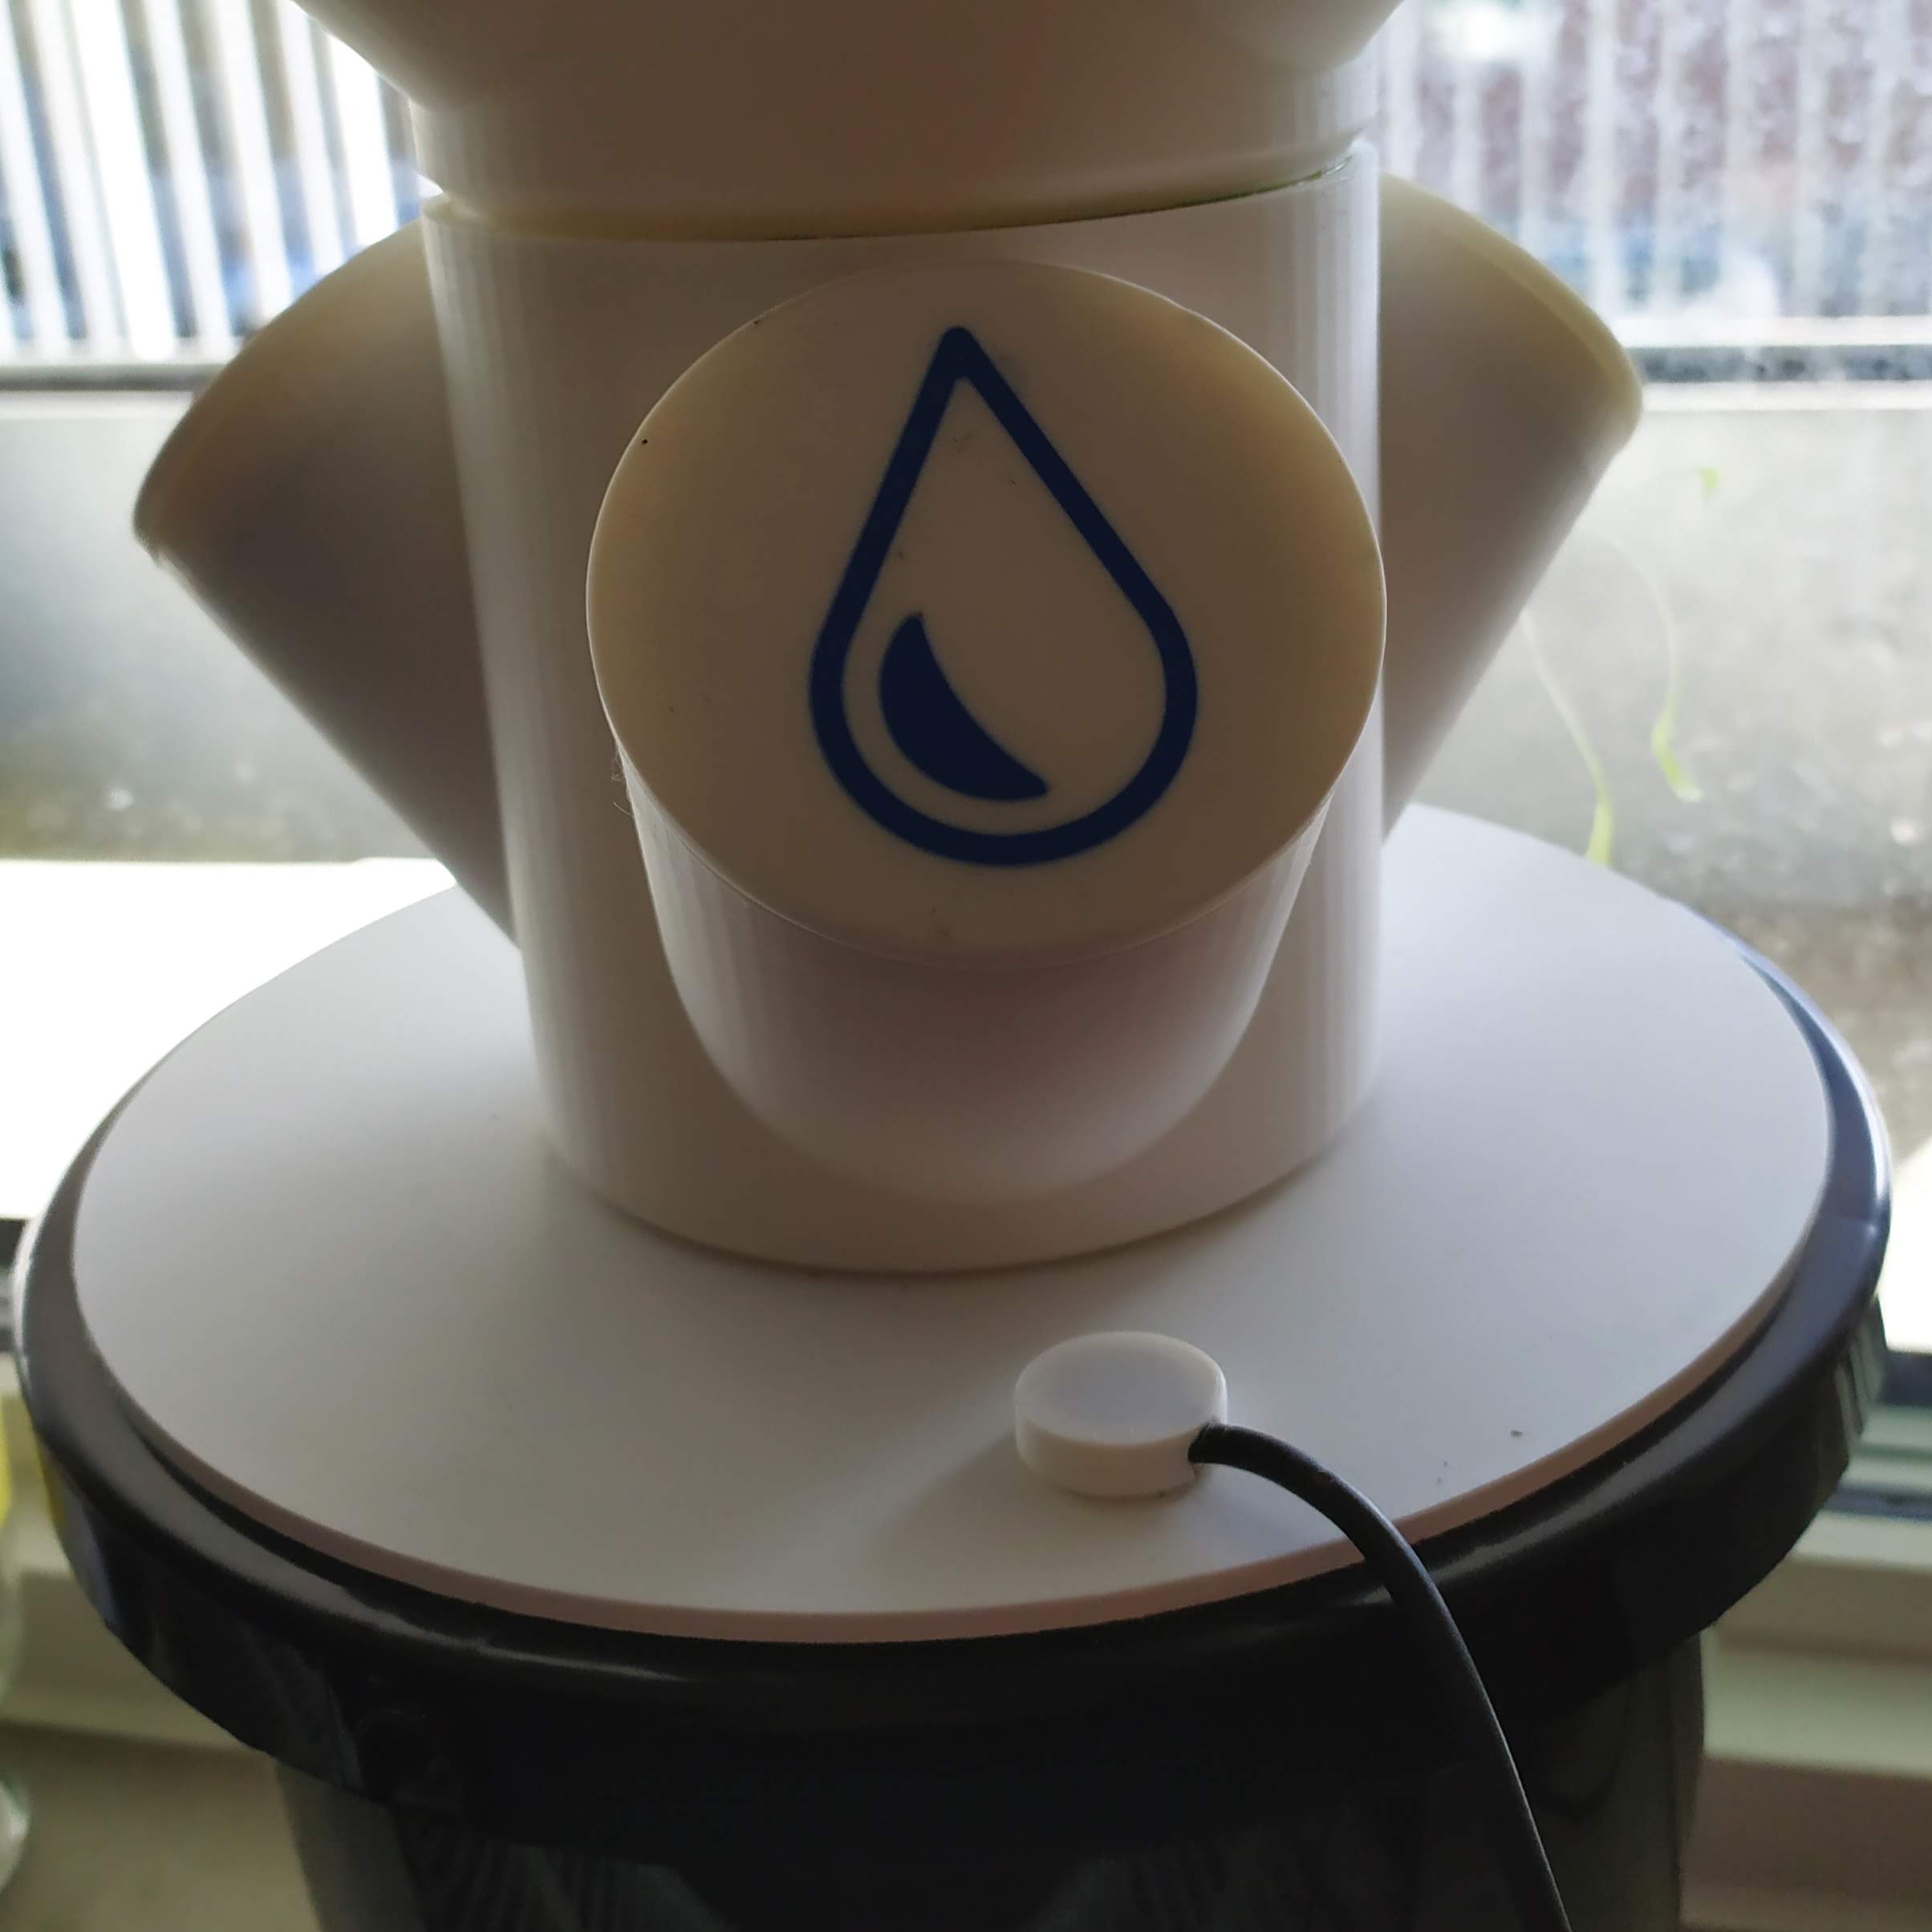 Segment lid with water droplet symbol